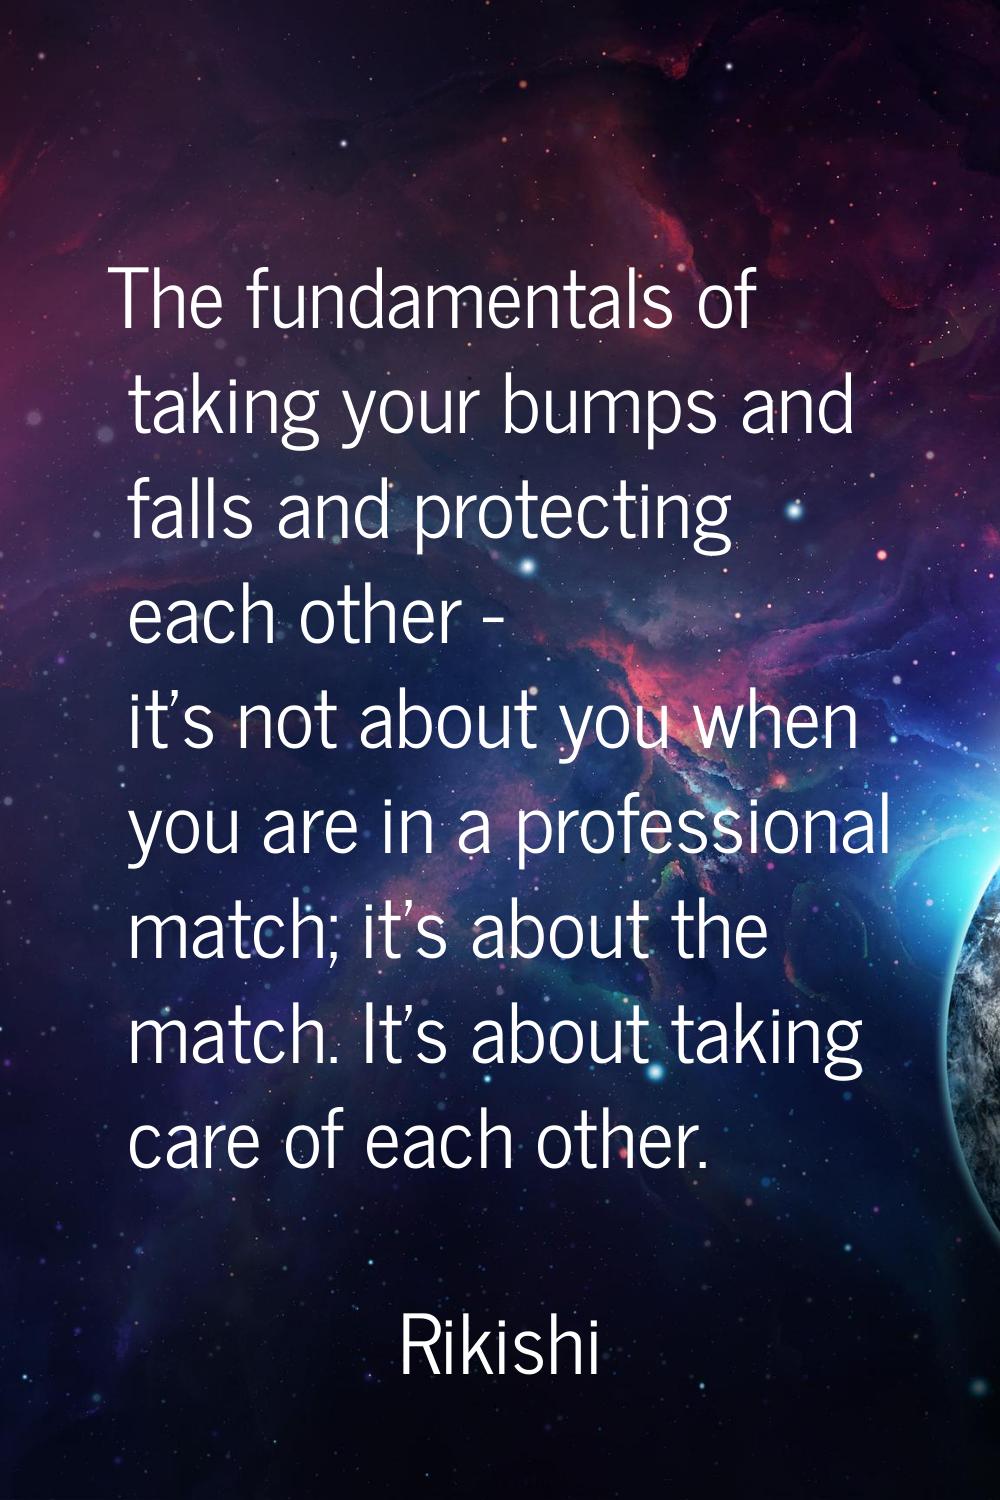 The fundamentals of taking your bumps and falls and protecting each other - it's not about you when